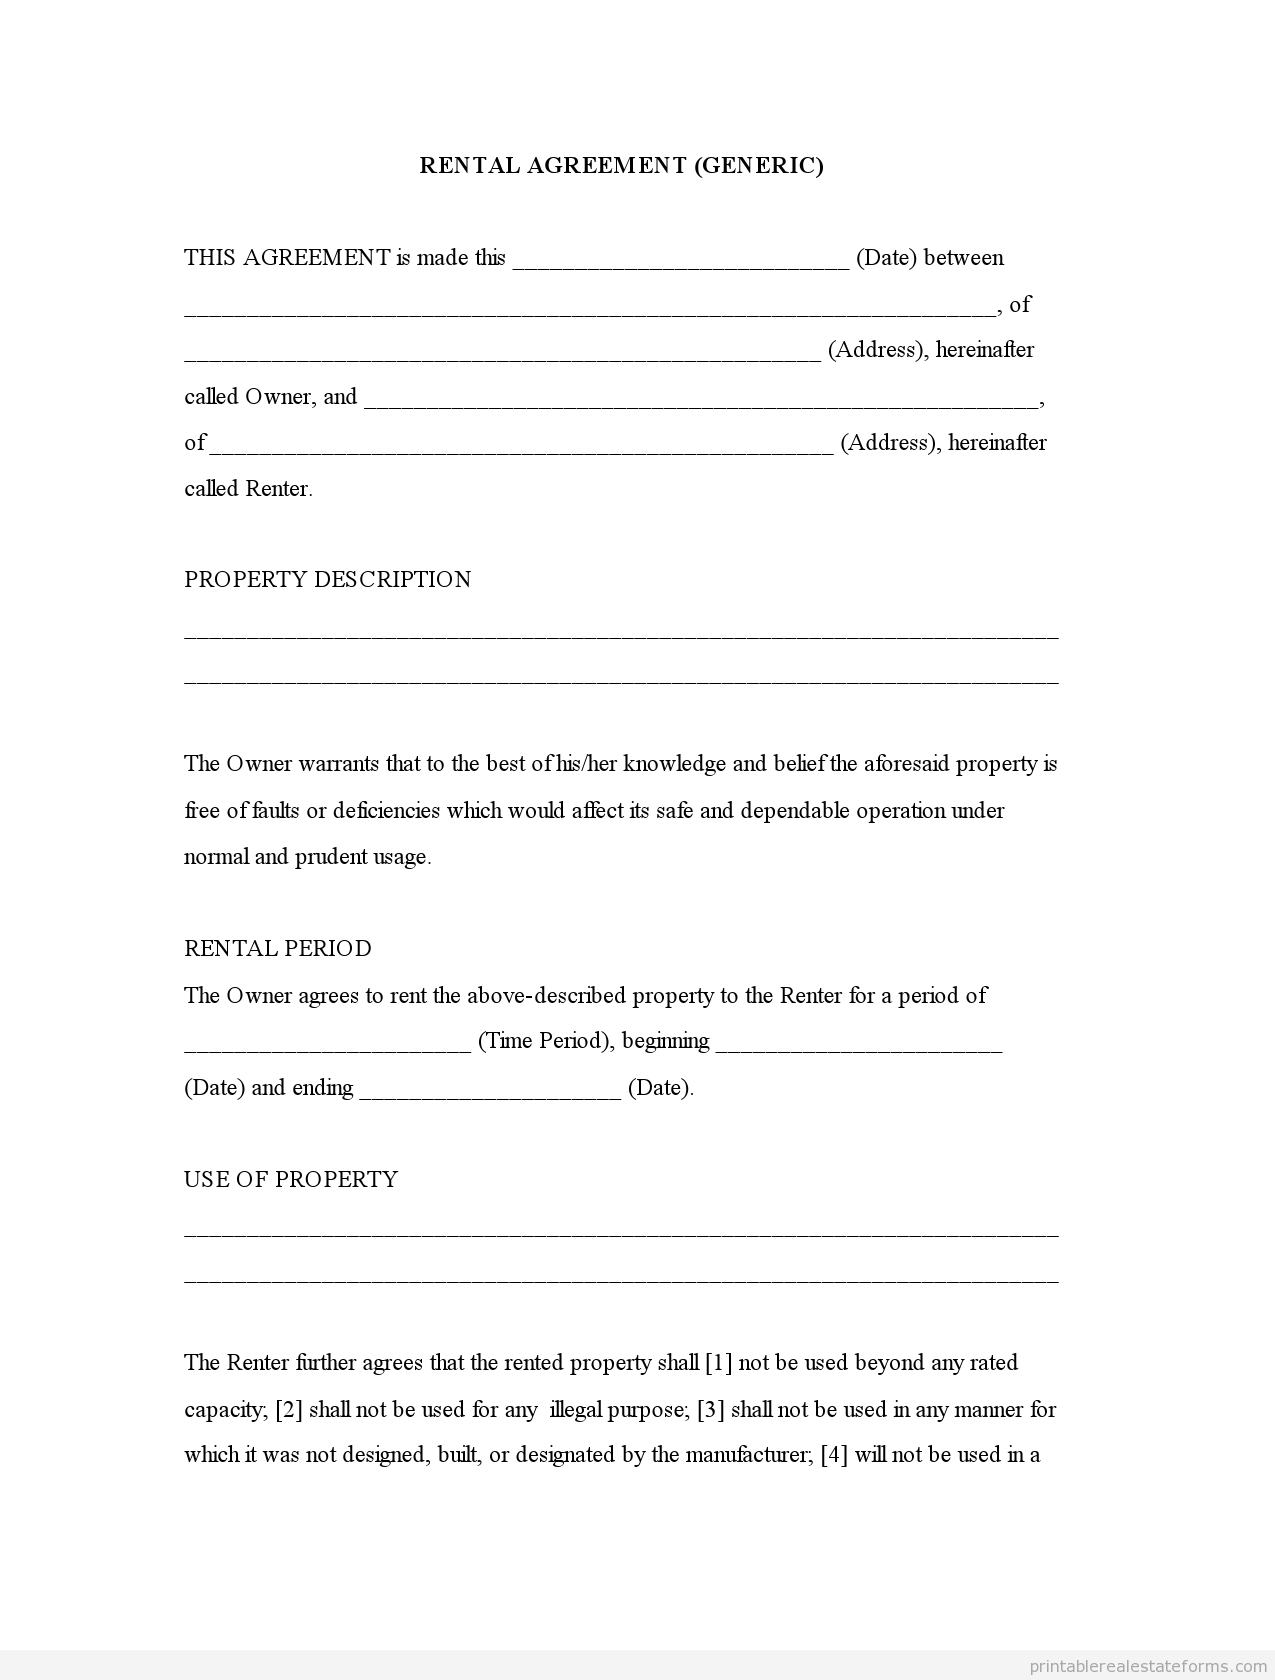 New Free Printable Residential Lease Agreement | Downloadtarget 